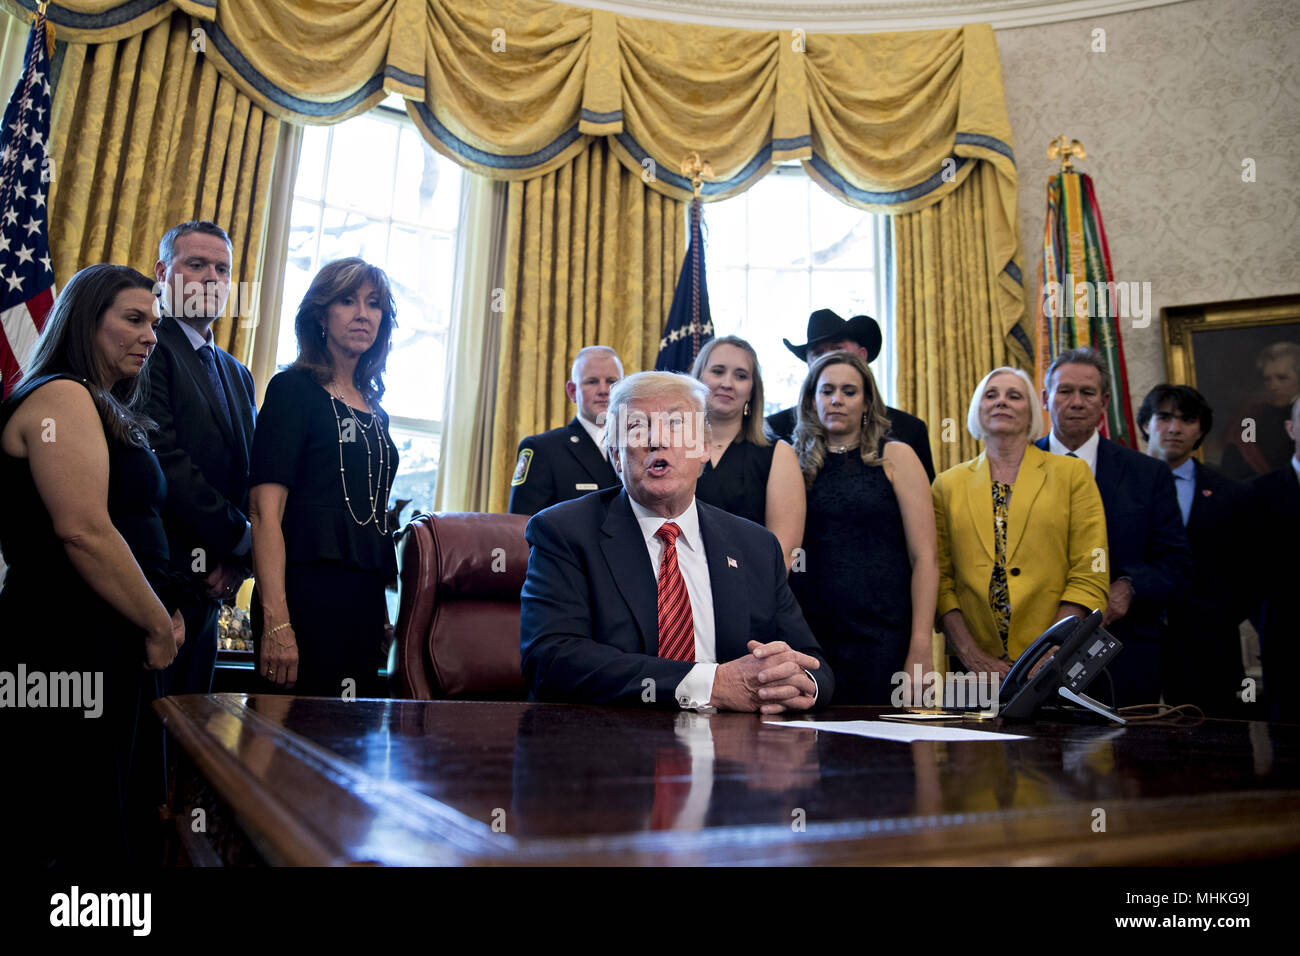 United States President Donald Trump, center, speaks as Tammie Jo Shults, a Southwest Airlines Co. captain, third left, and Darren Ellisor, a Southwest Airlines first officer, second left, listen while meeting with the crew and passengers of Southwest Airlines flight 1380 in the Oval Office of the White House in Washington, DC, U.S., on Tuesday, May 1, 2018. An engine on Southwest's flight 1380, a Boeing Co. 737-700 bound for Dallas from New York's LaGuardia airport, exploded and made an emergency landing on April 17 sending shrapnel into the plane and killing a passenger seated near a windo Stock Photo